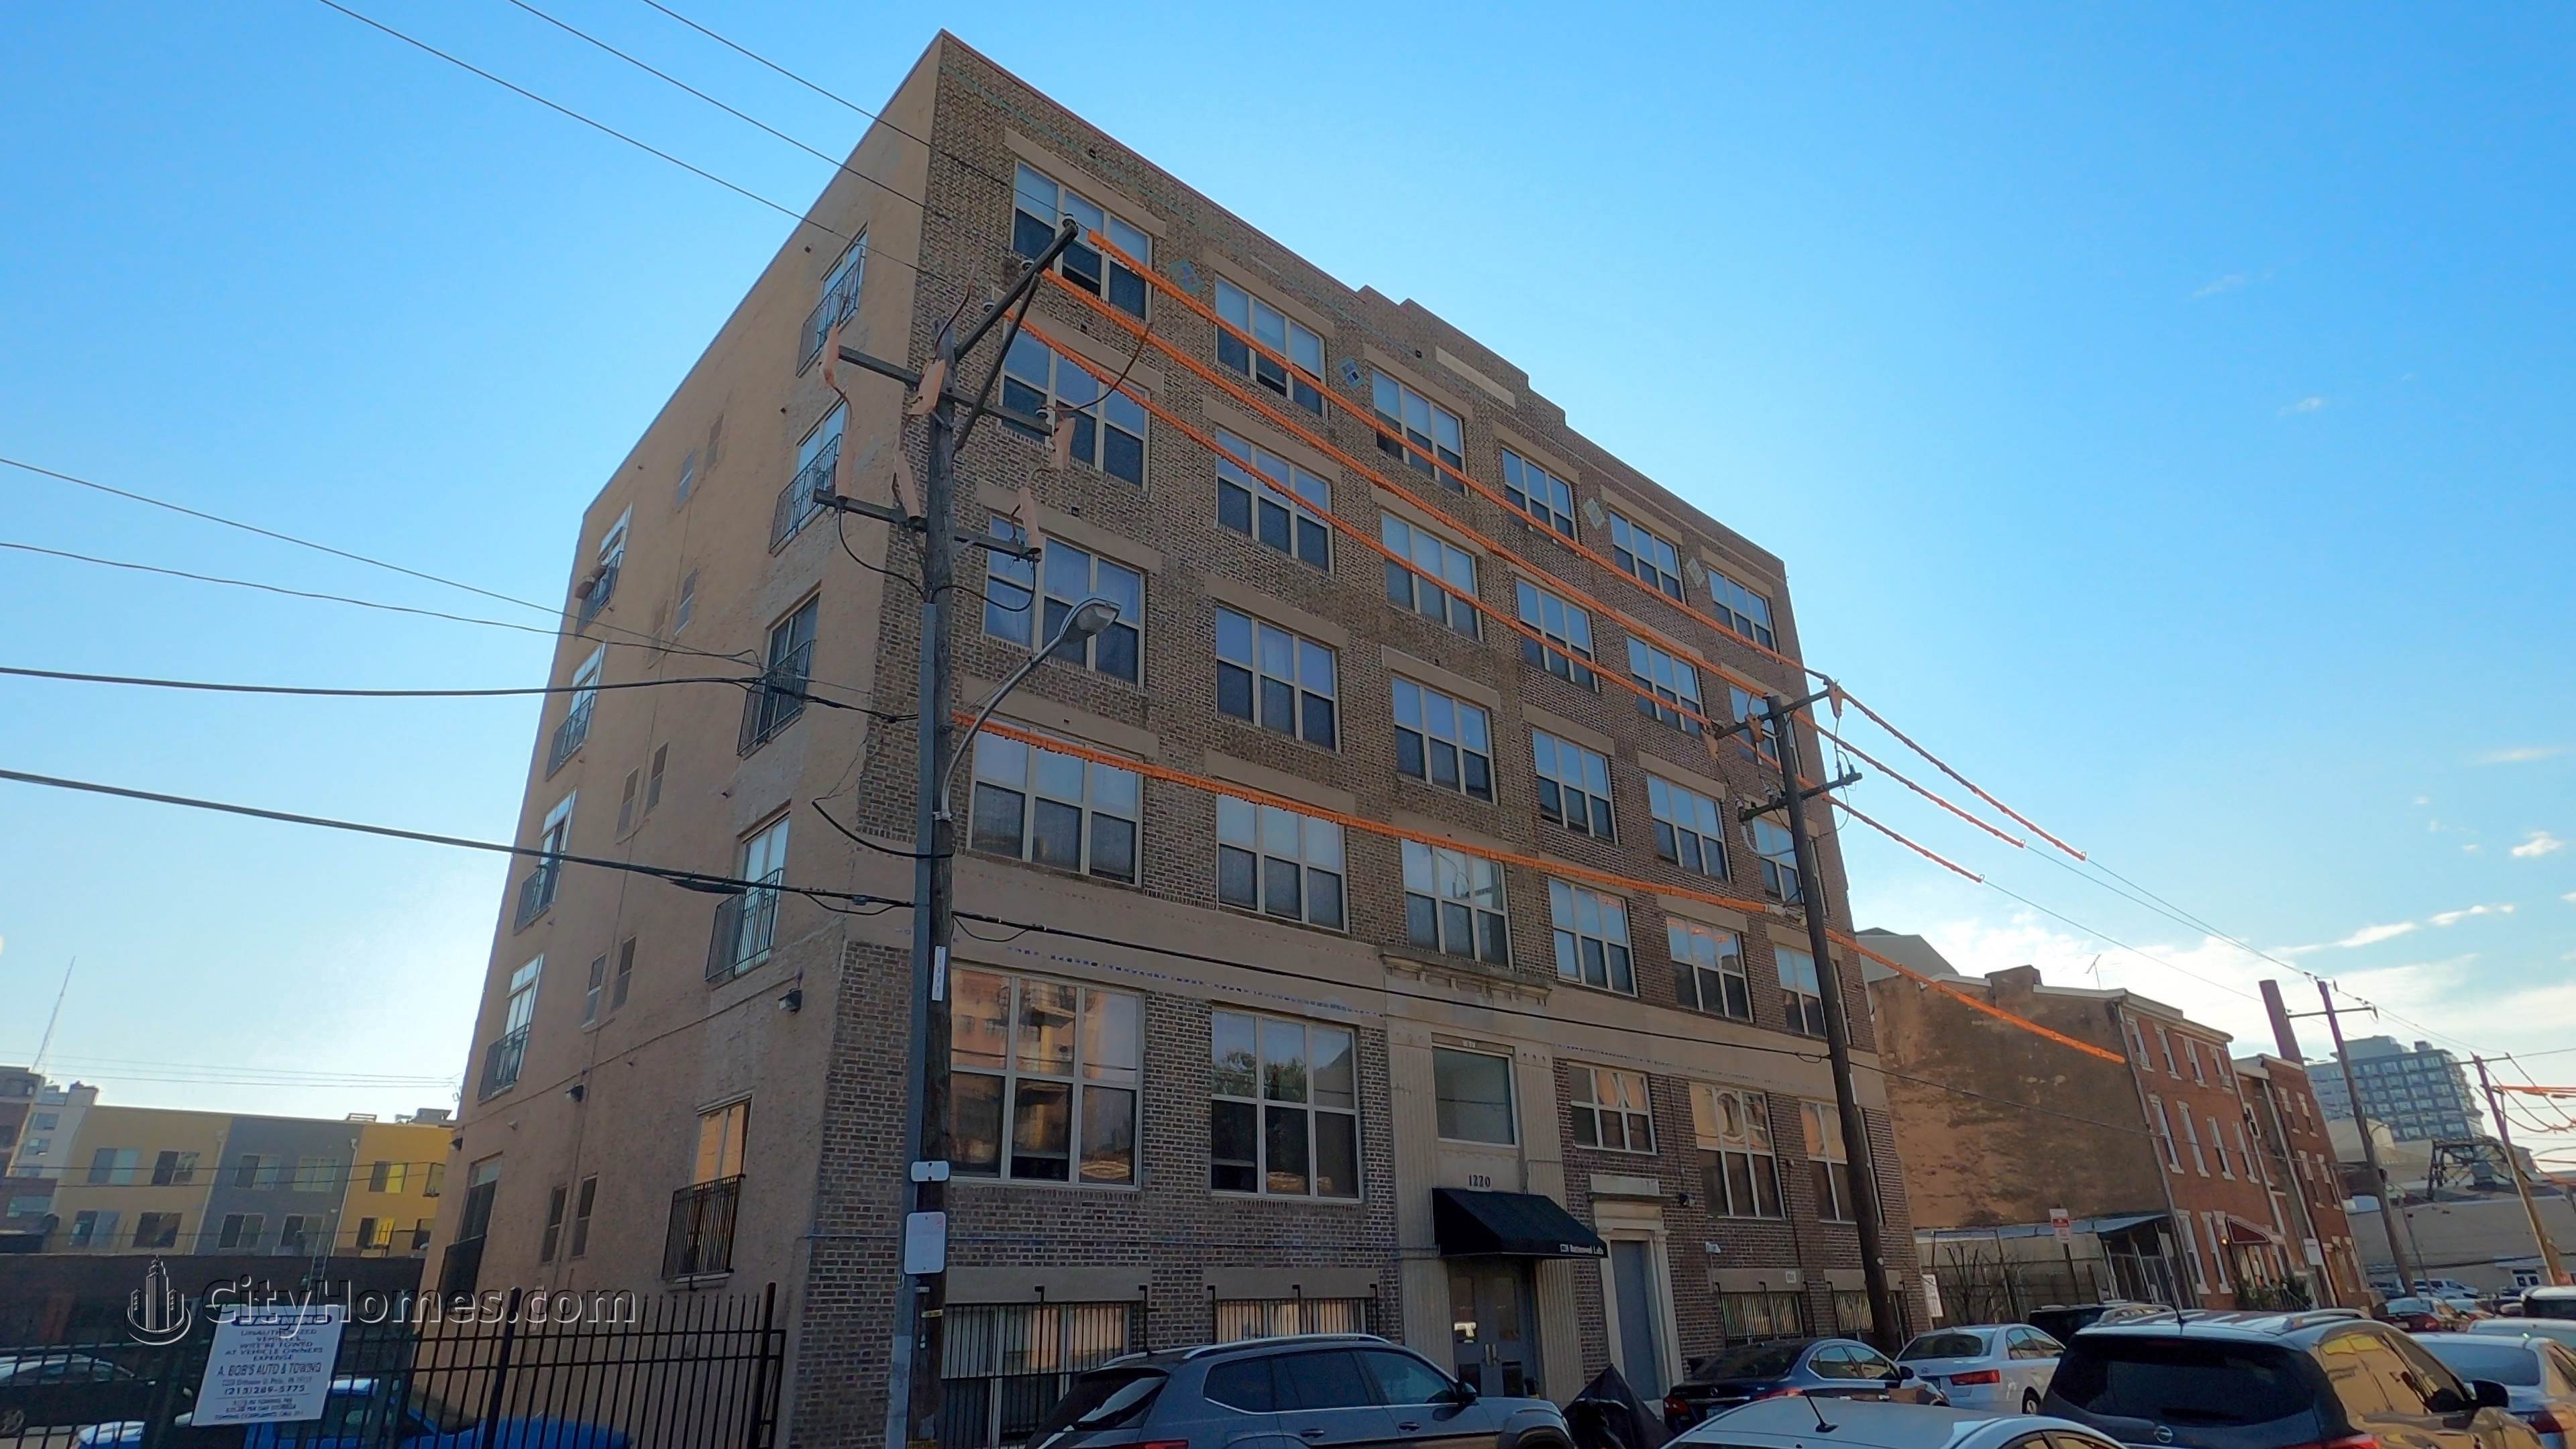 2. 1220 Buttonwood Lofts building at 1210-26 Buttonwood St, Callowhill, Philadelphia, PA 19123